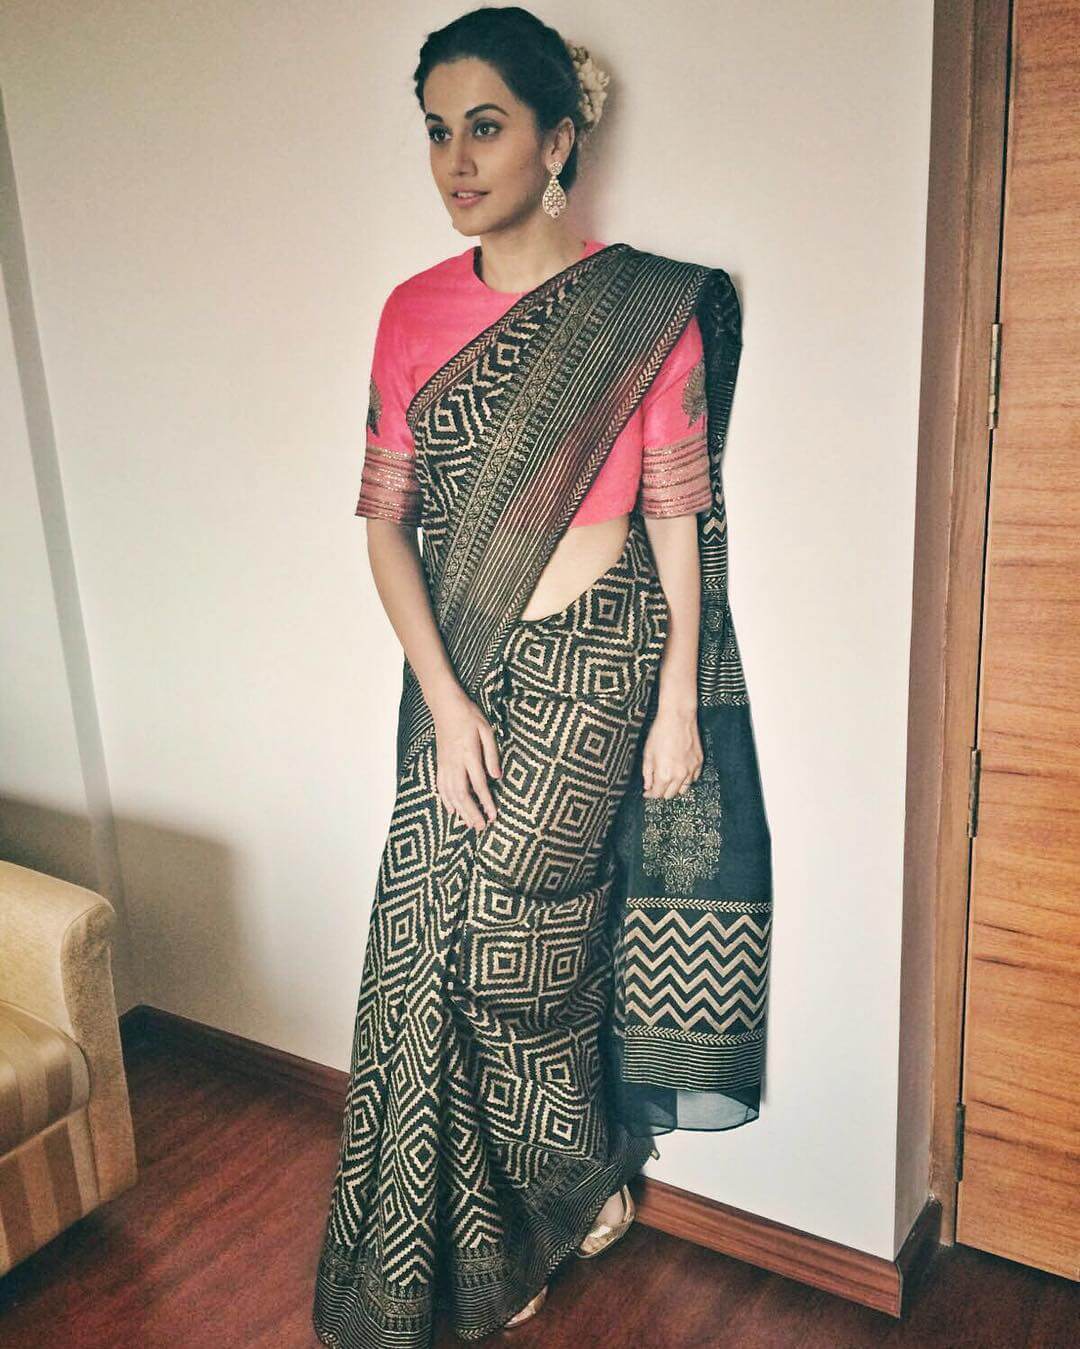 Wear The Patterns Like Taapsee